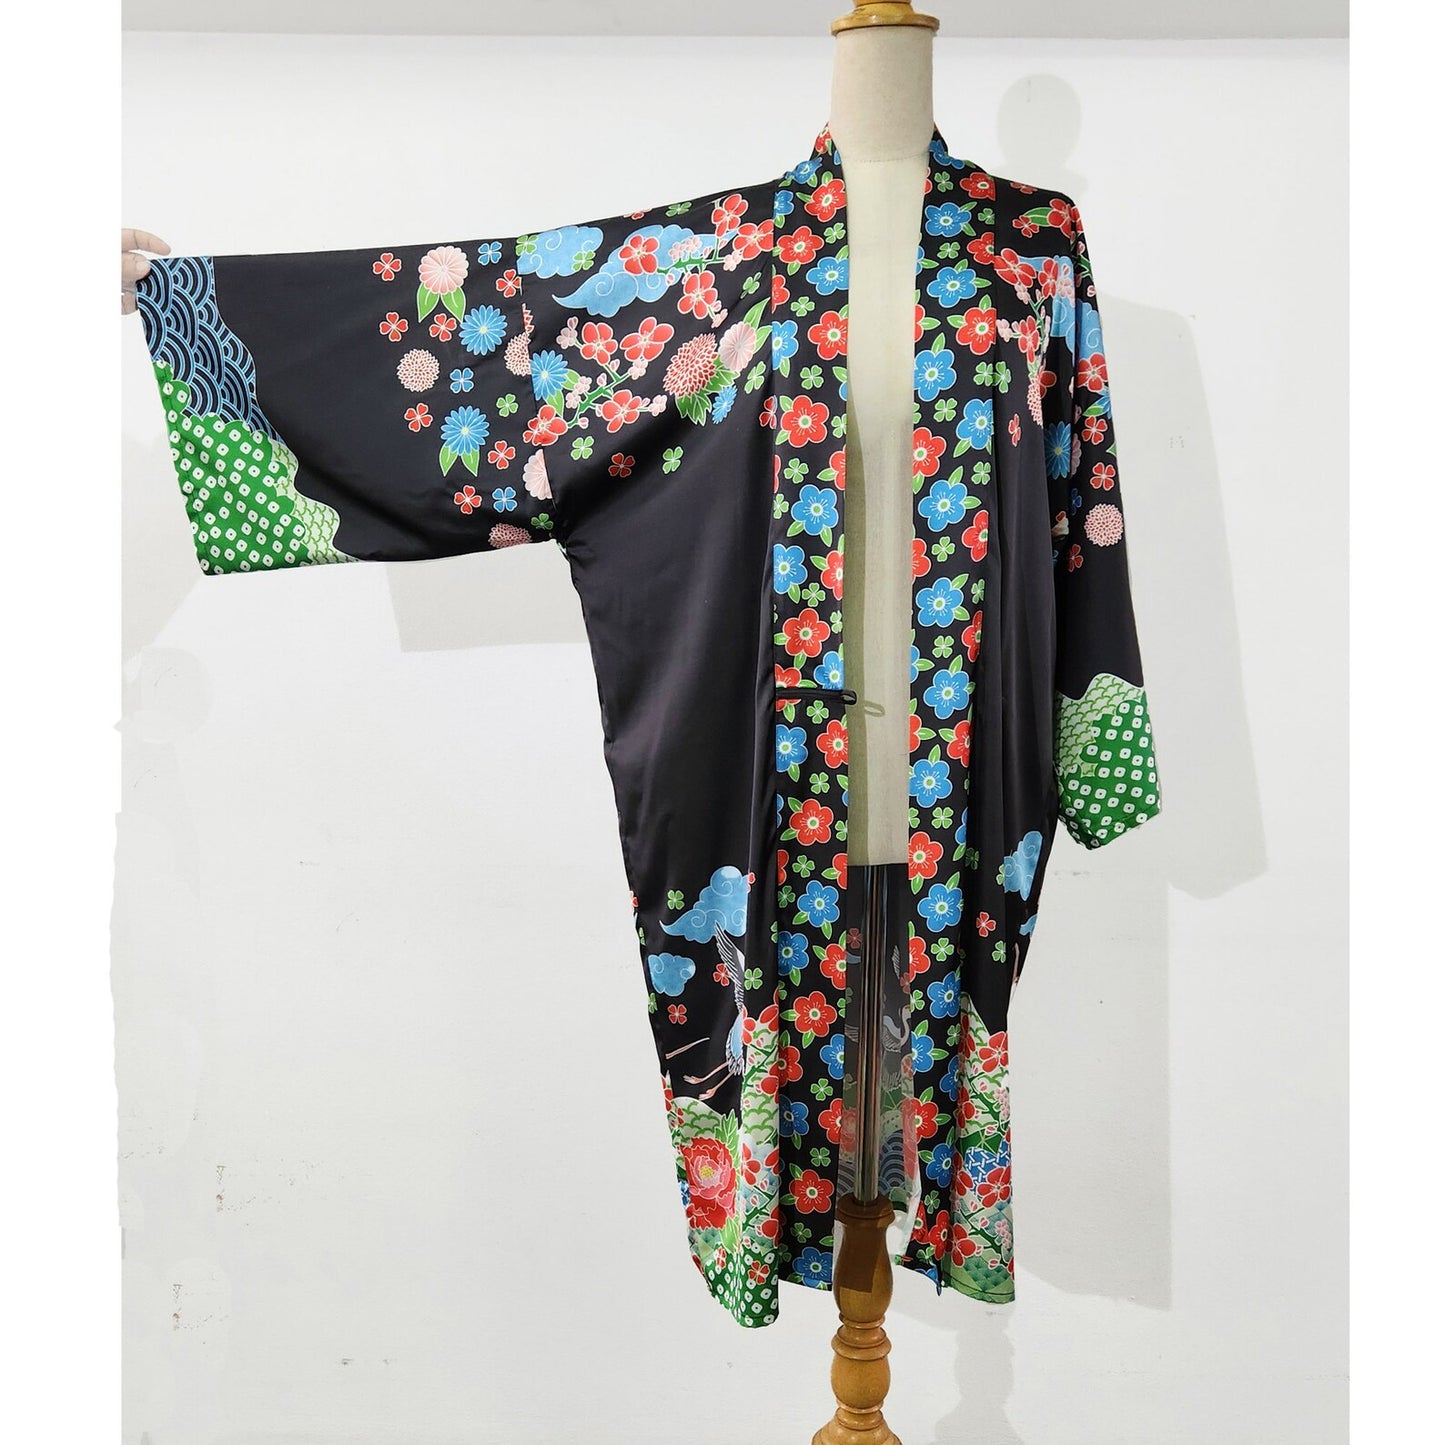 Japanese art inspired kimono robe in black with floral and bird print